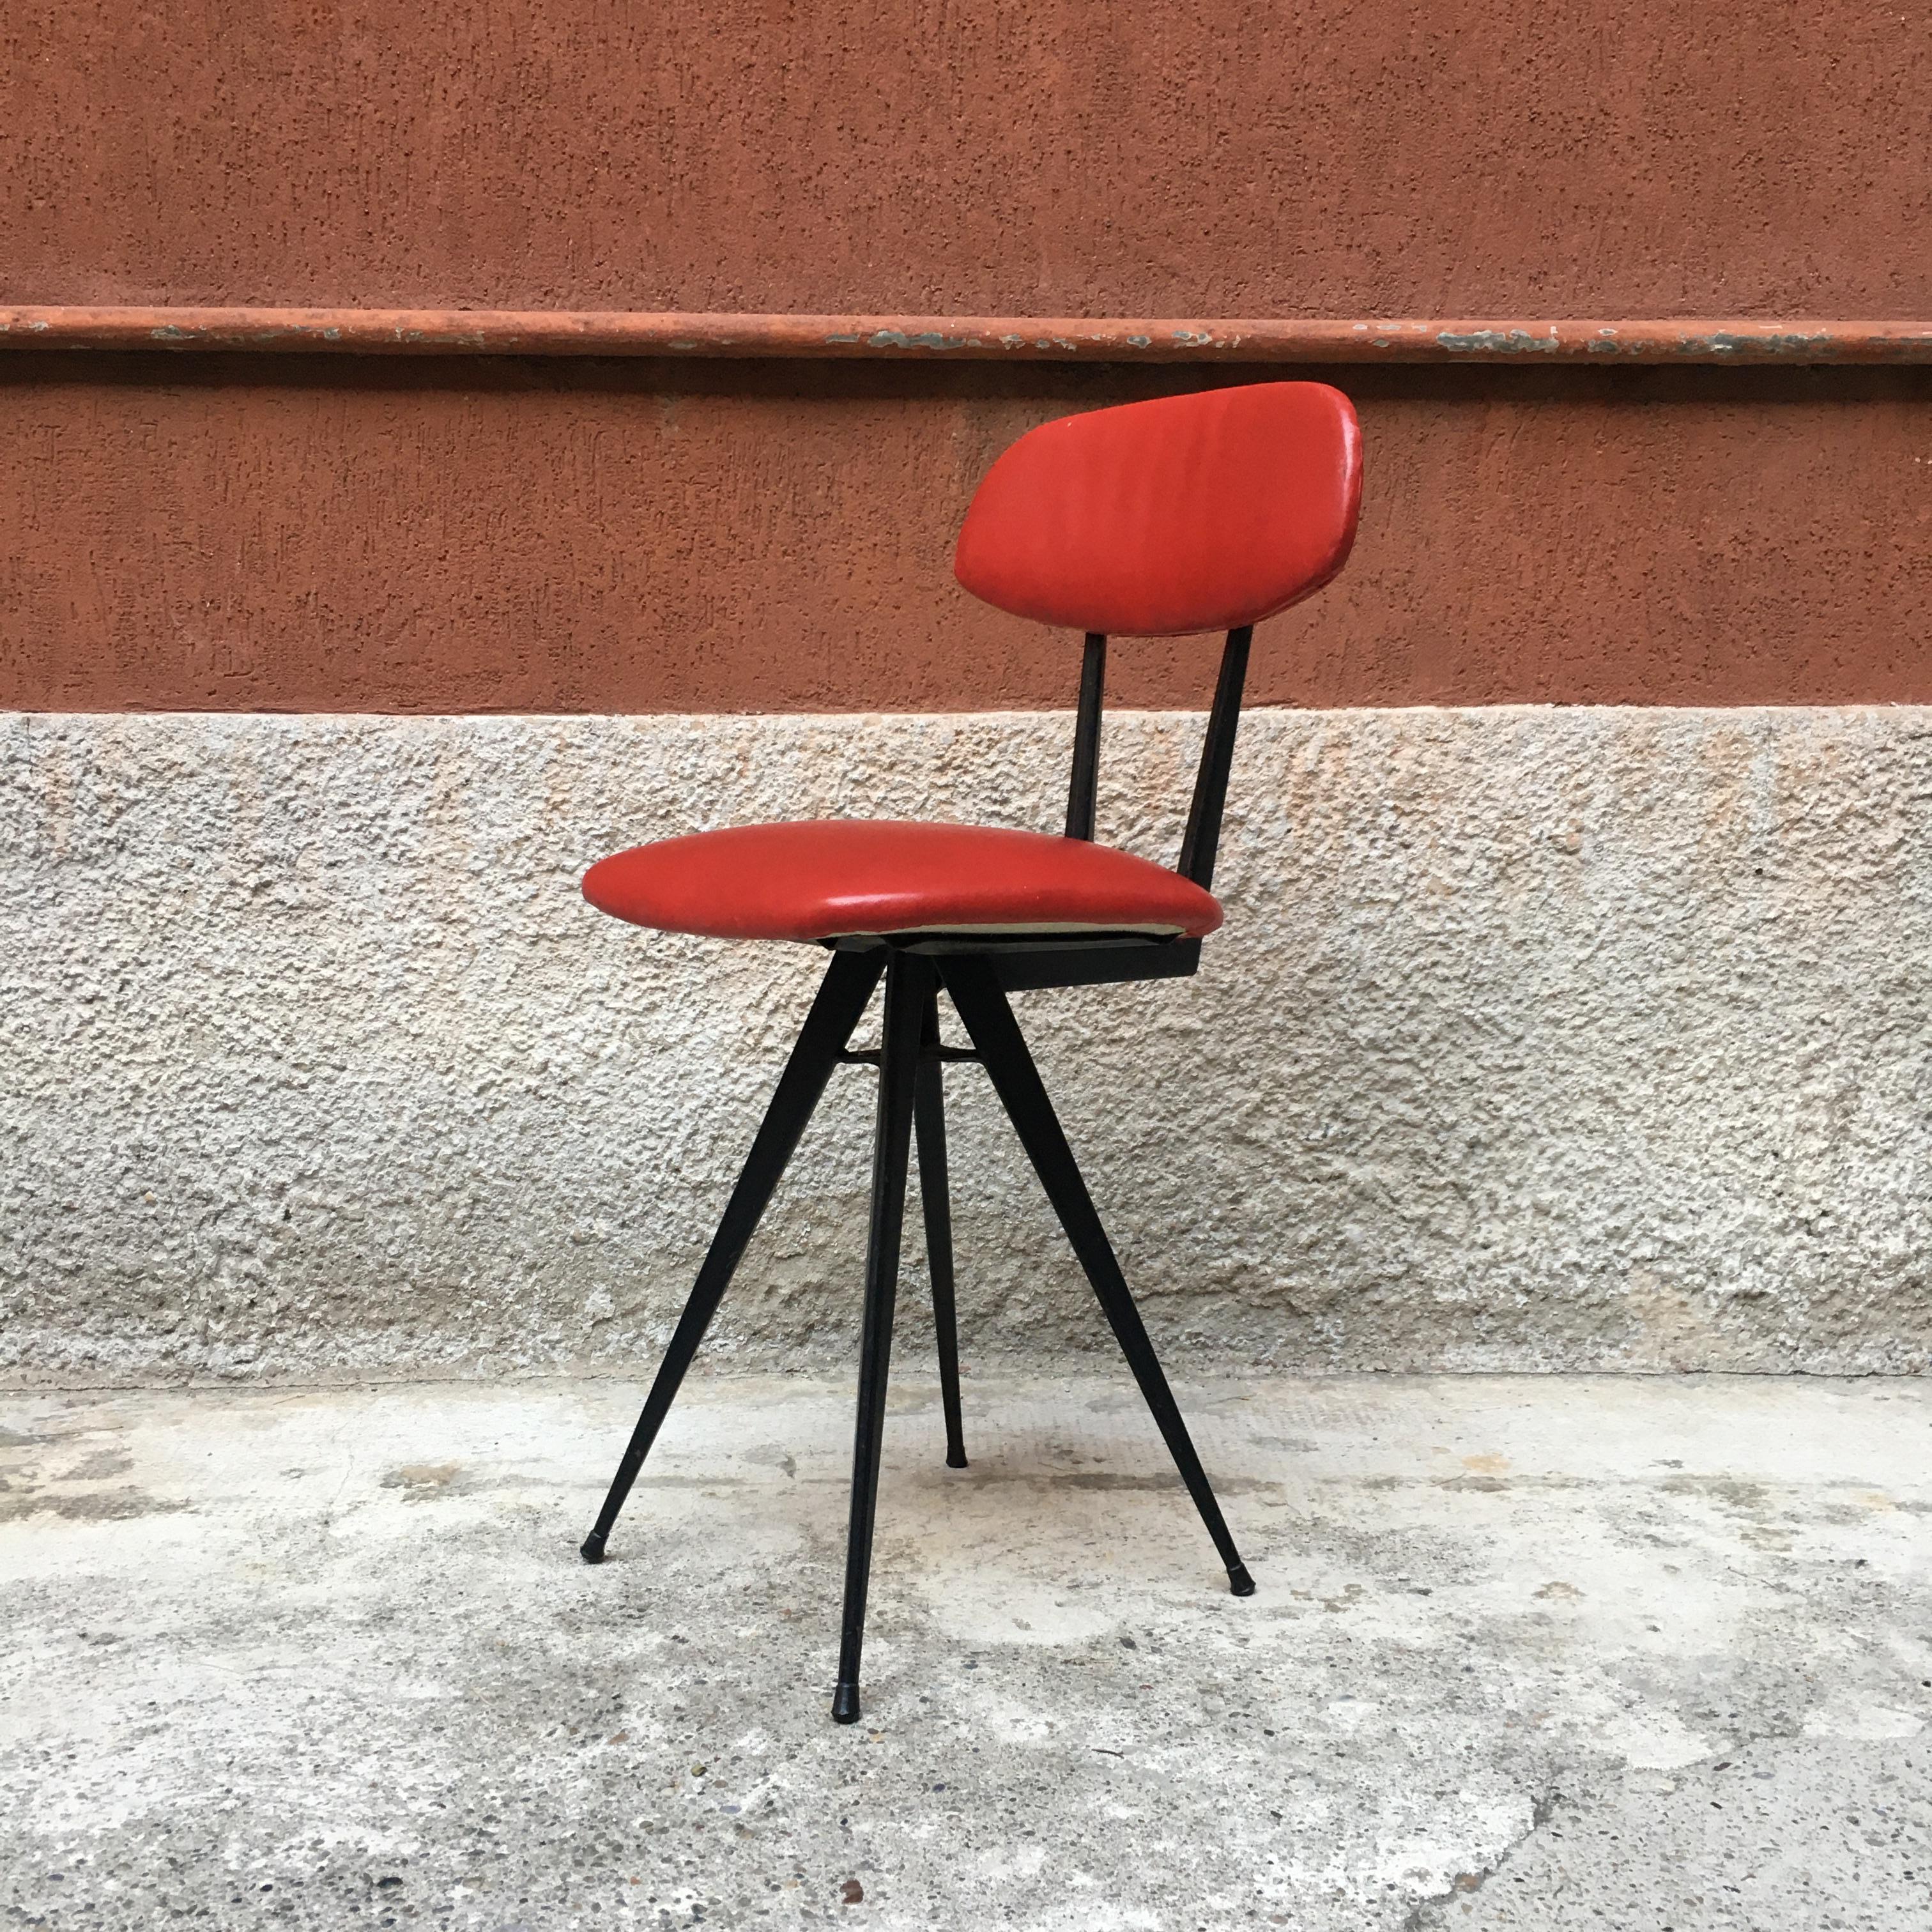 Italian red leatherette and metal legs chairs, 1960s
Chairs with metal frame, padded seat and upholstery covered in red sky
Perfect conditions.